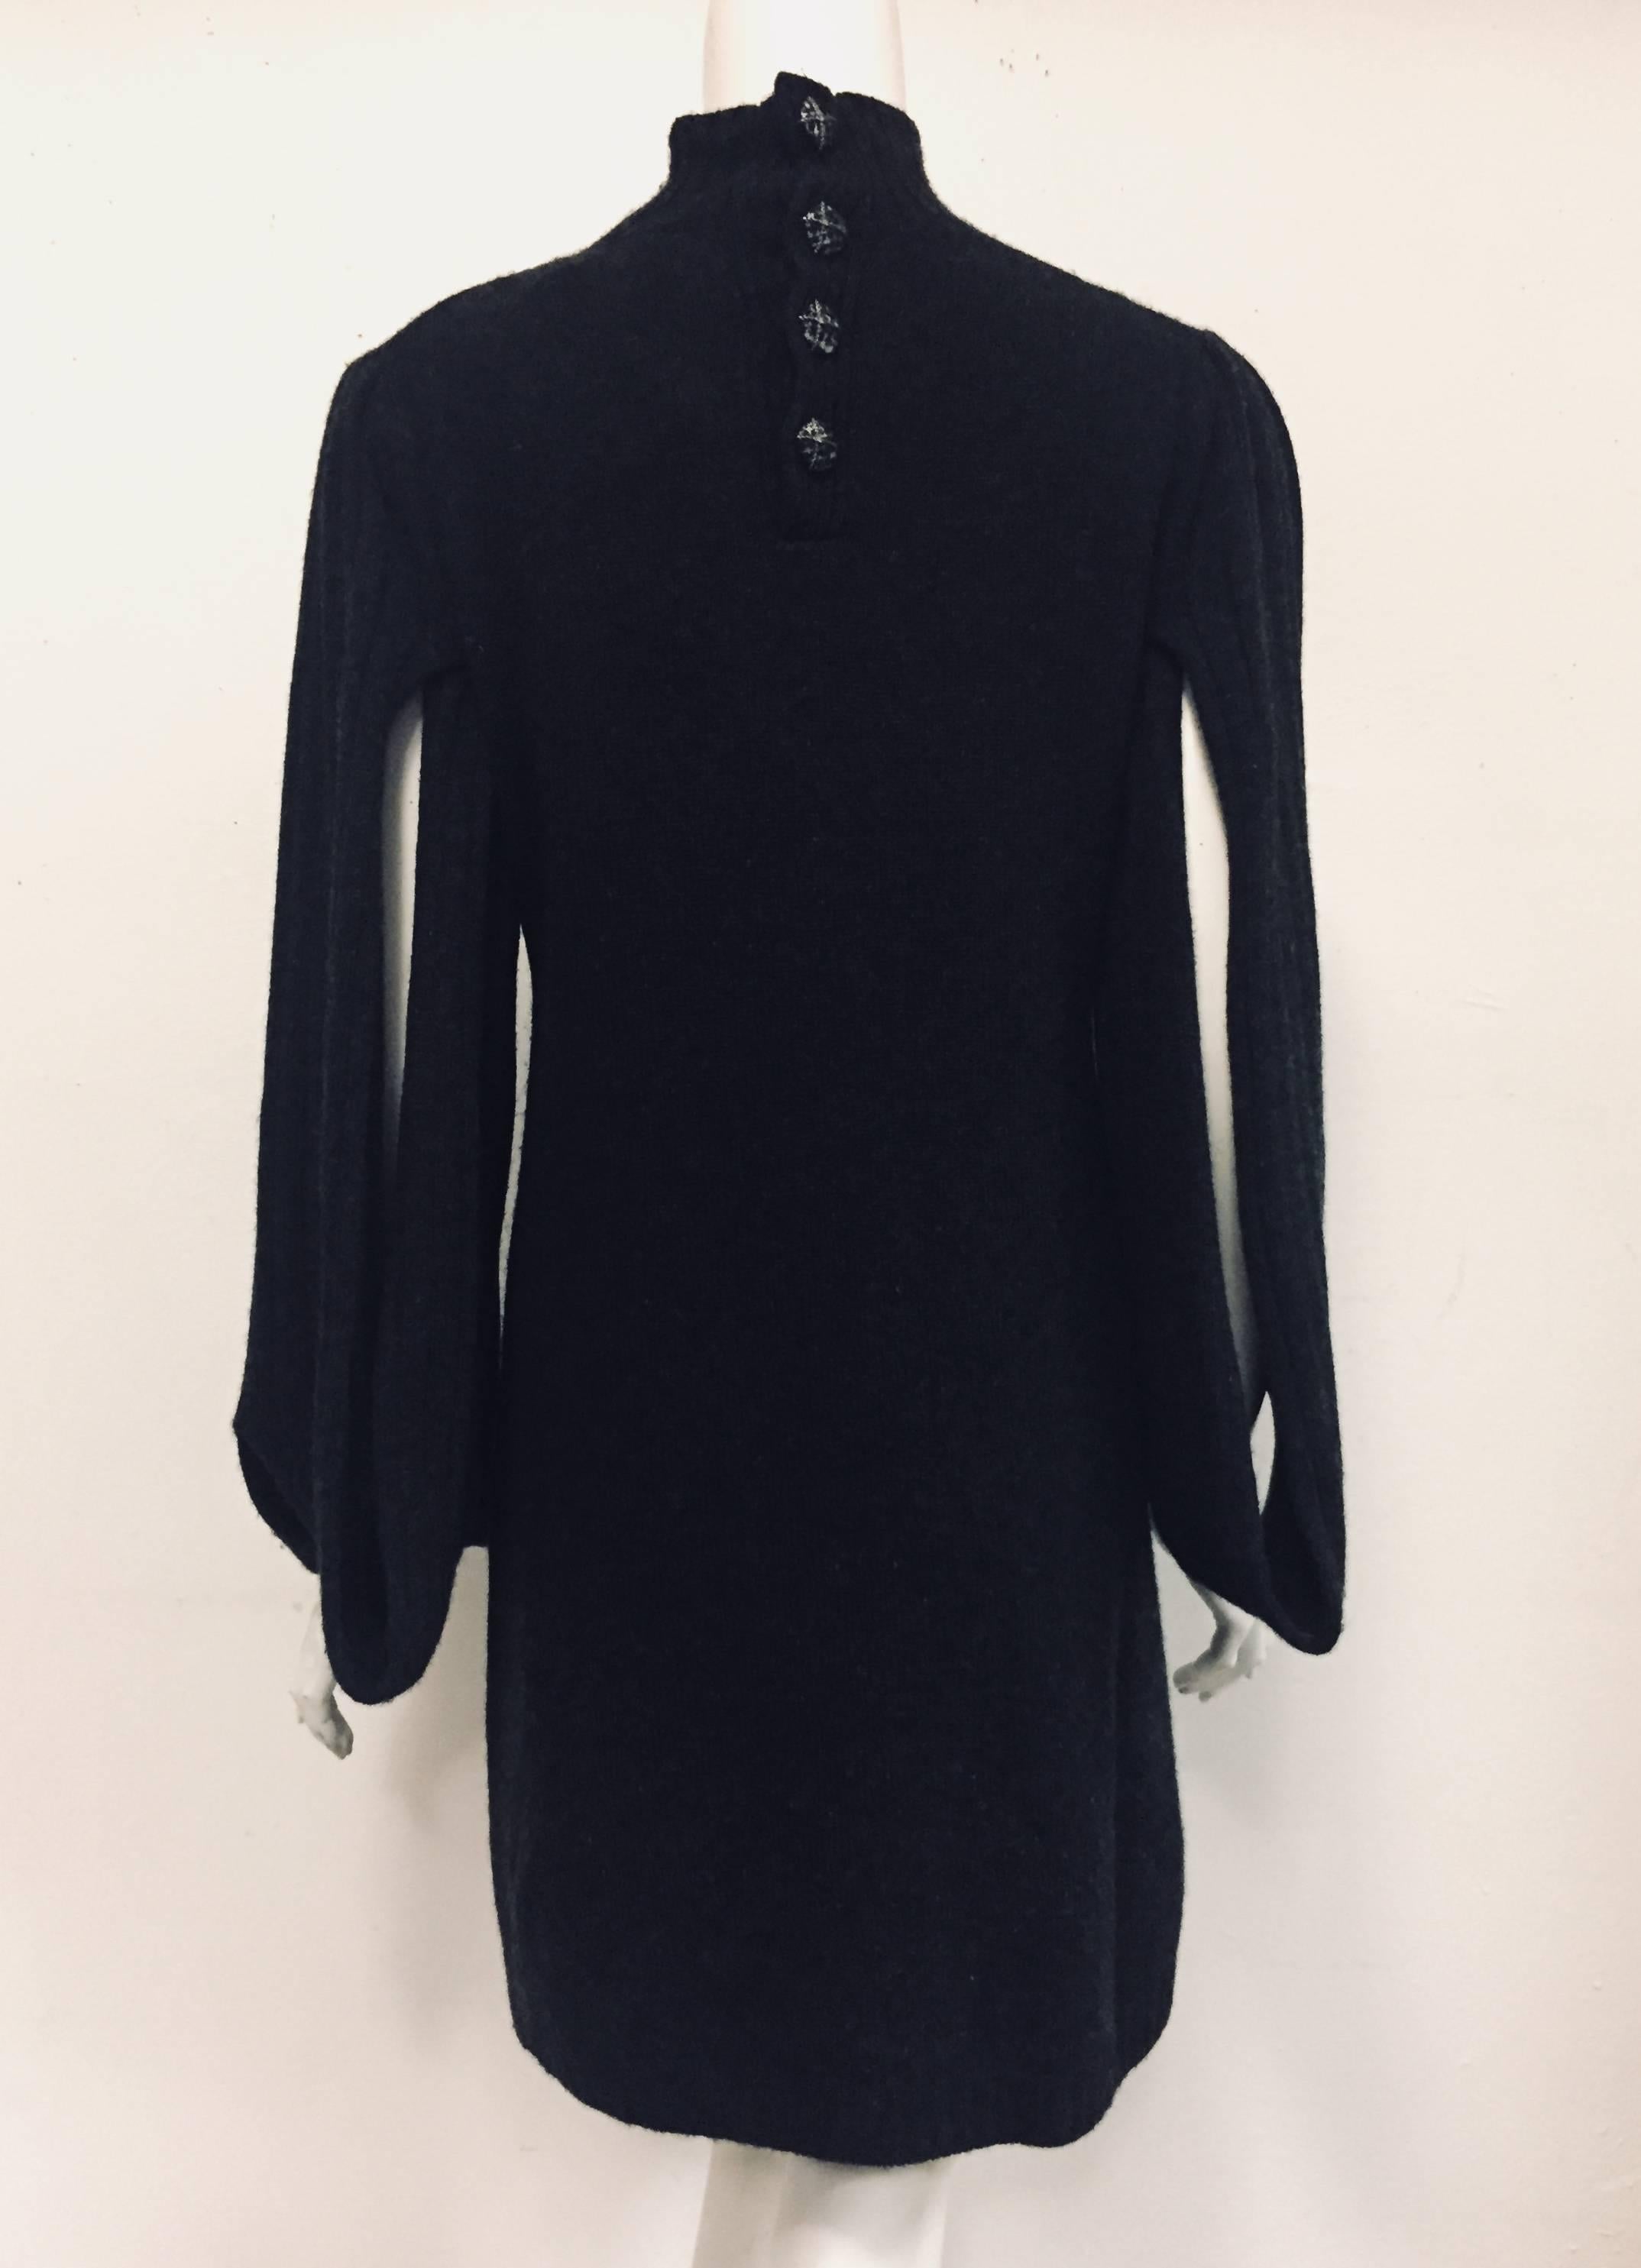 Black Chanel Charcoal Long Open Sleeve Knit Cashmere Sweater Dress